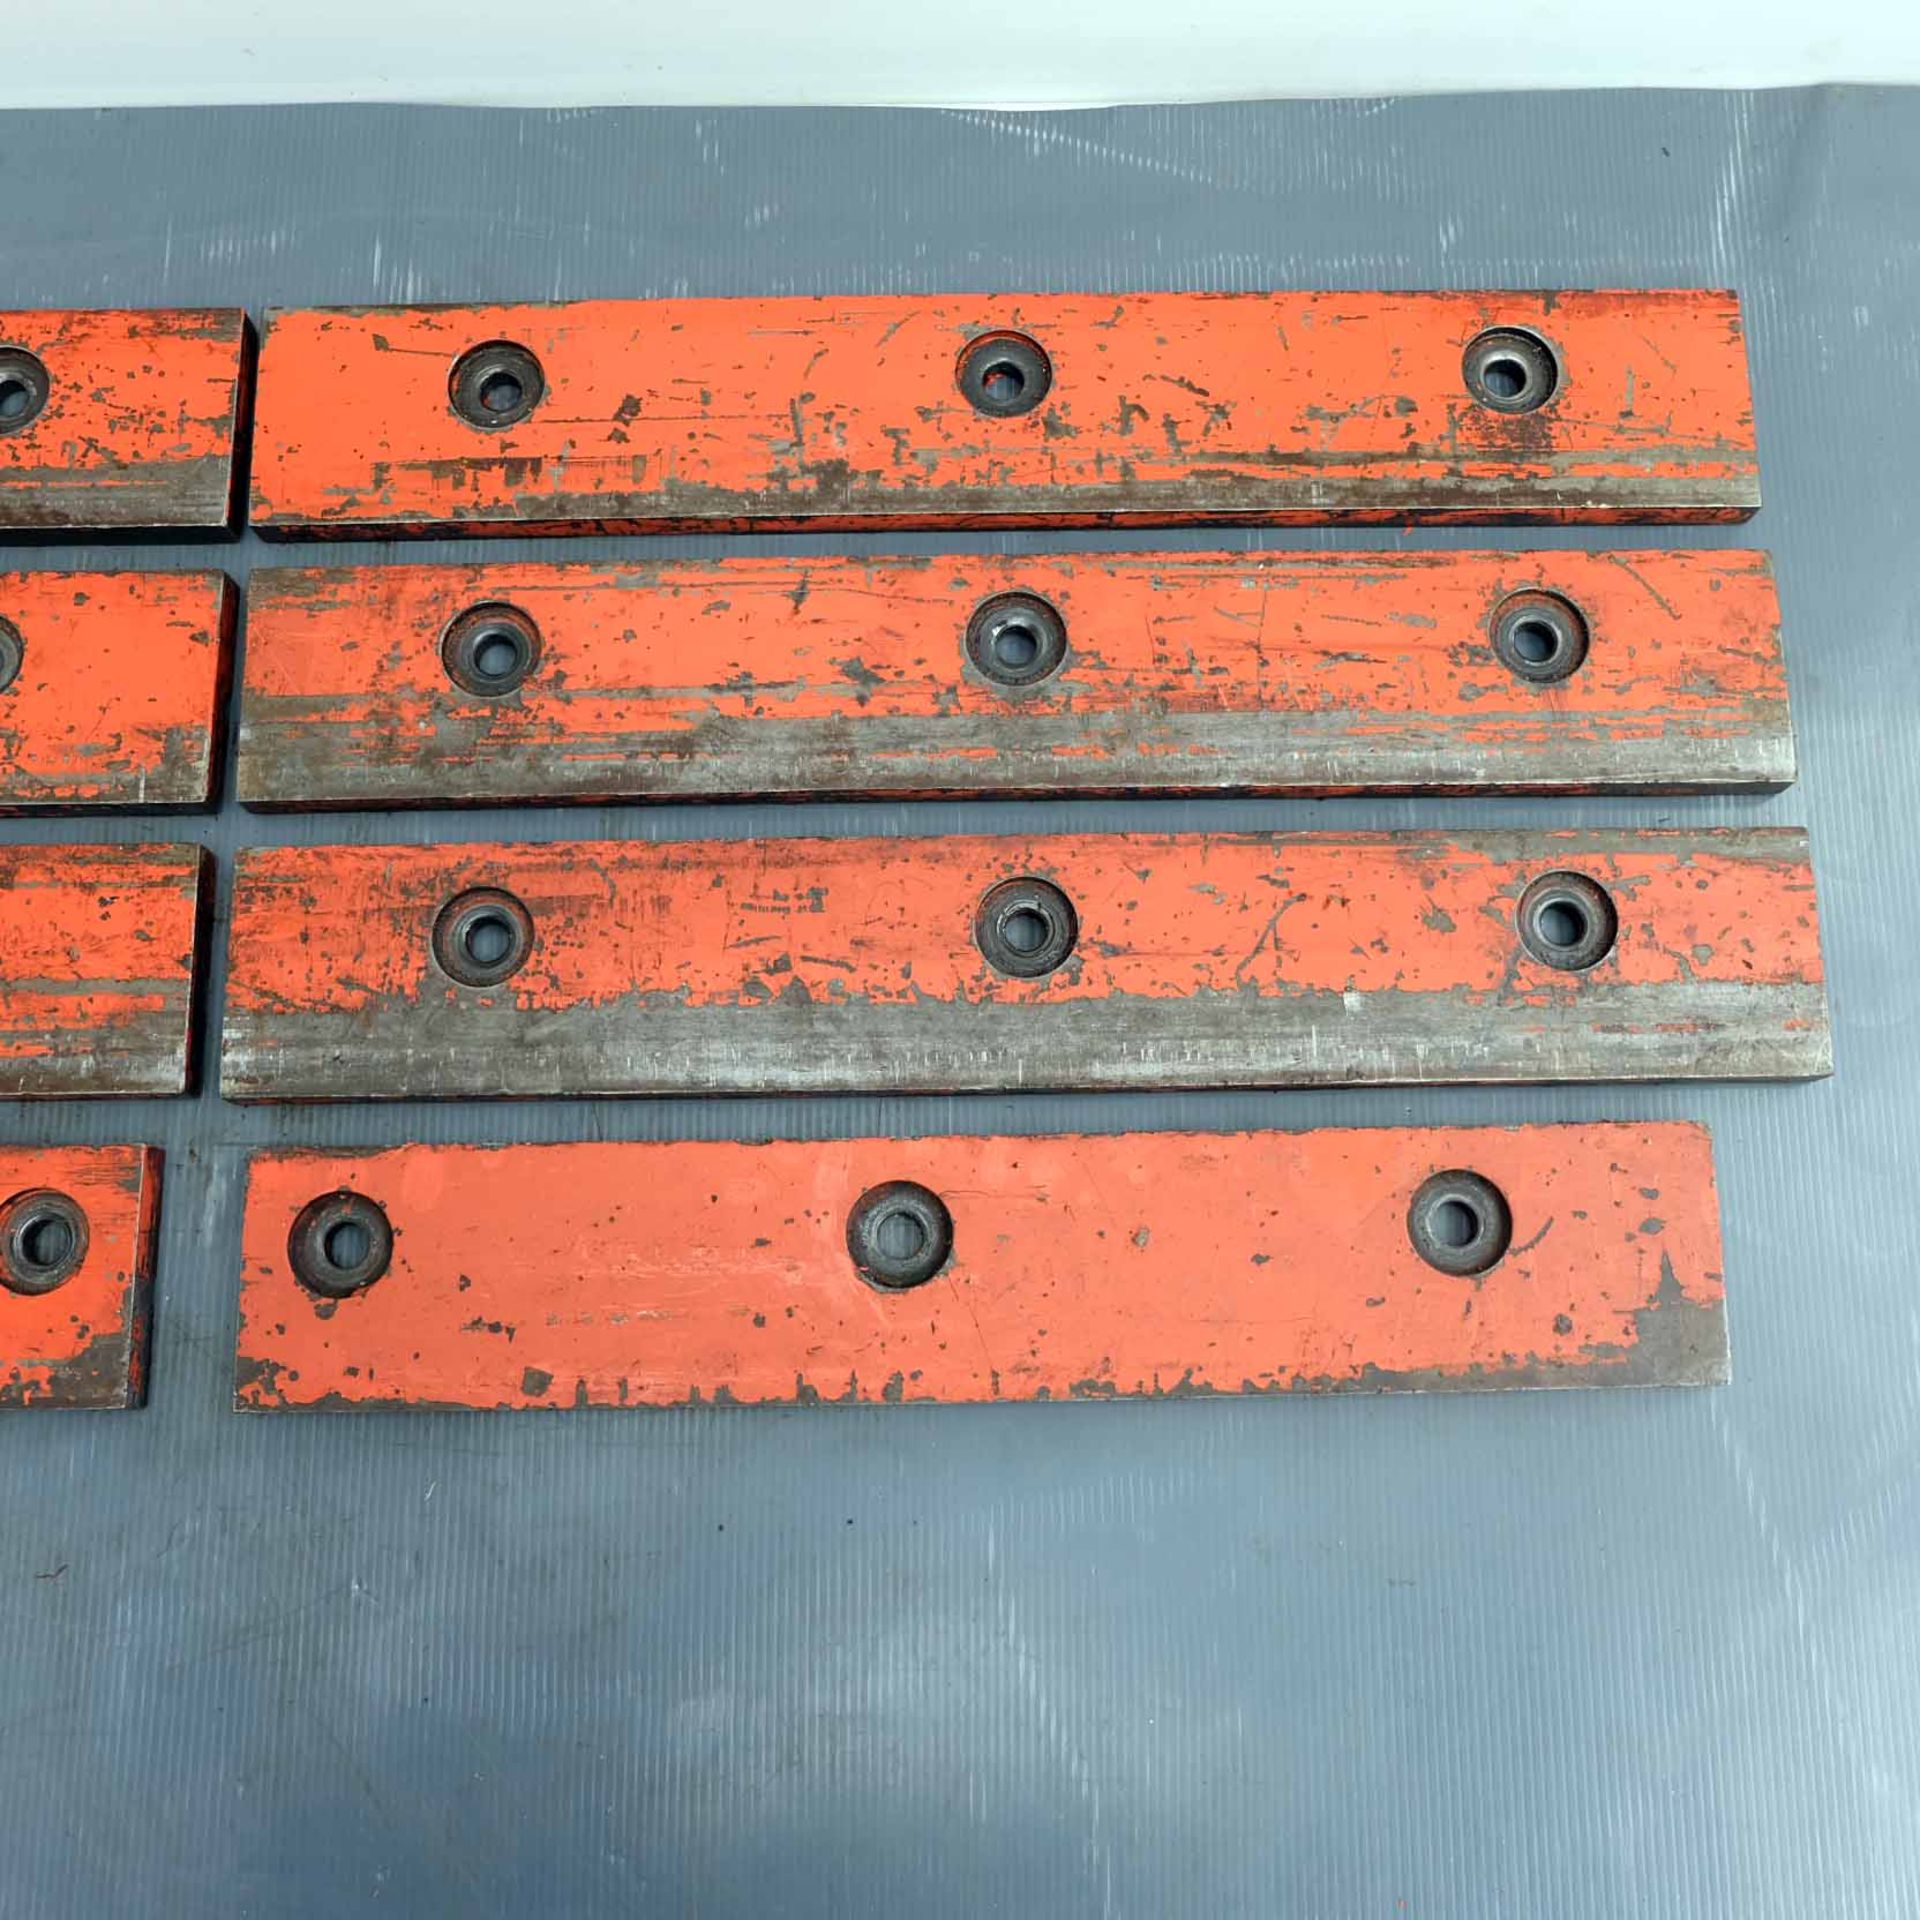 Set of 7 Top Tool Clamps for Press Brakes. 6 x 500mm Long. 2 x 450mm Long. - Image 3 of 5